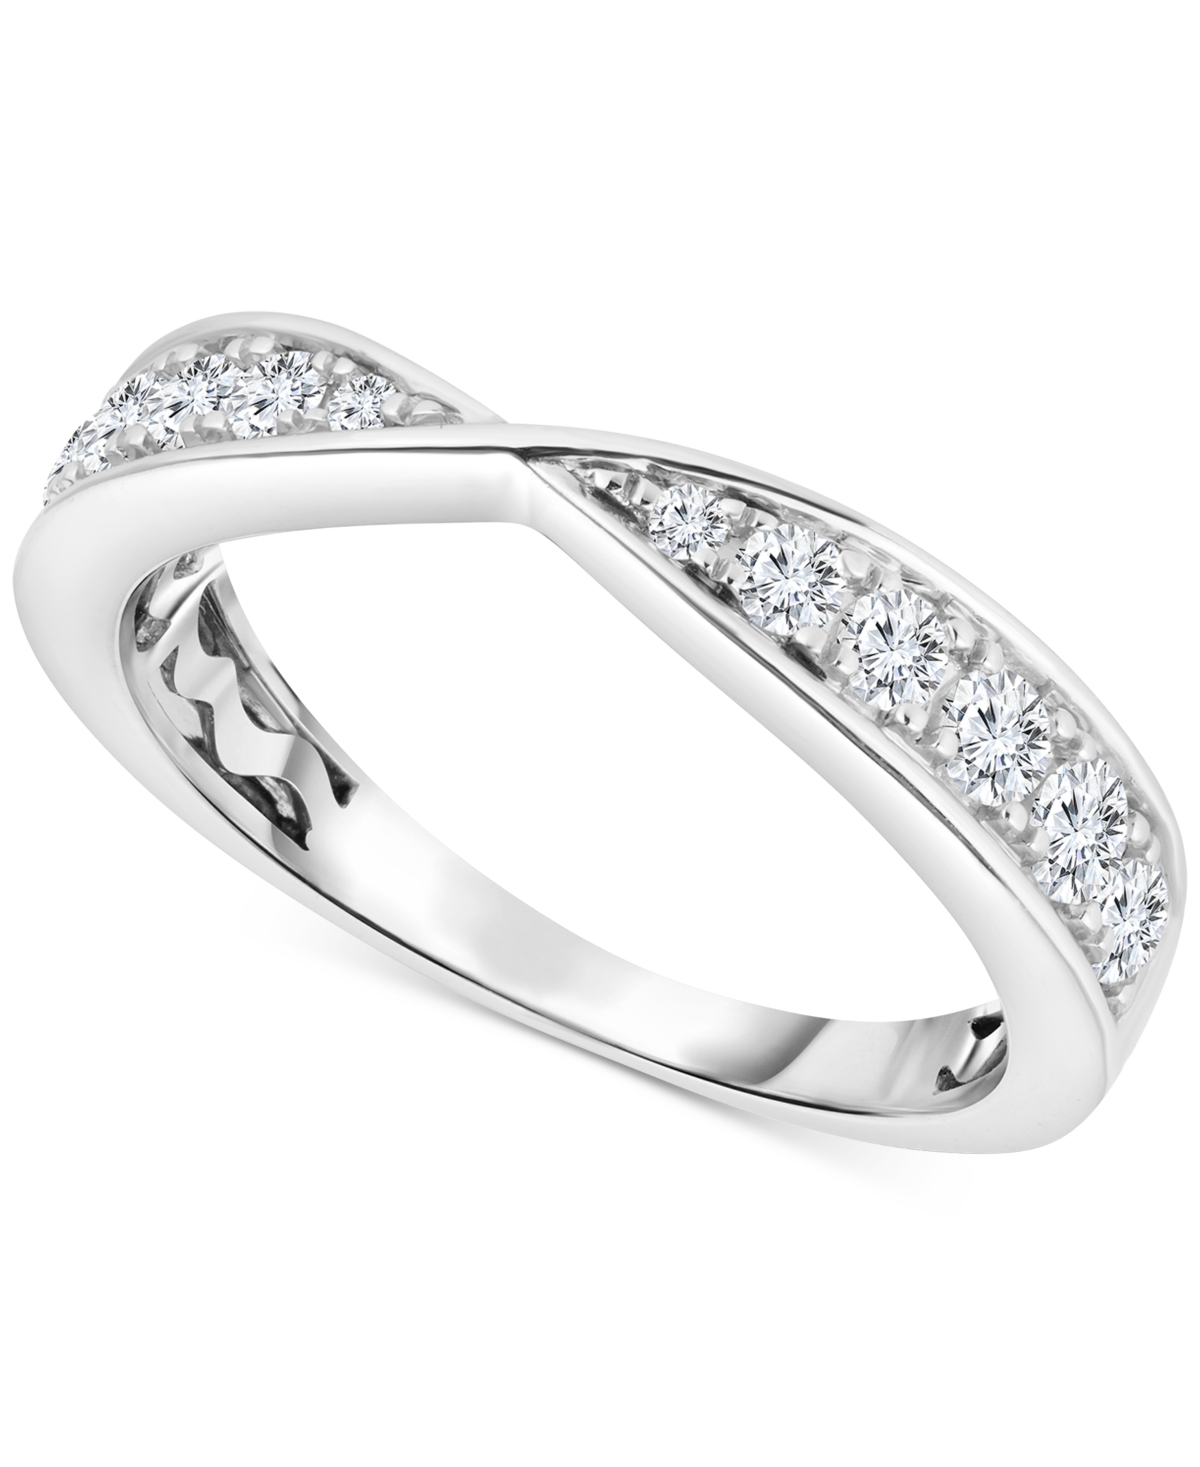 Diamond High-Polished Bowtie Contour Band (1/4 ct. t.w.) in 14K White Gold - White Gold